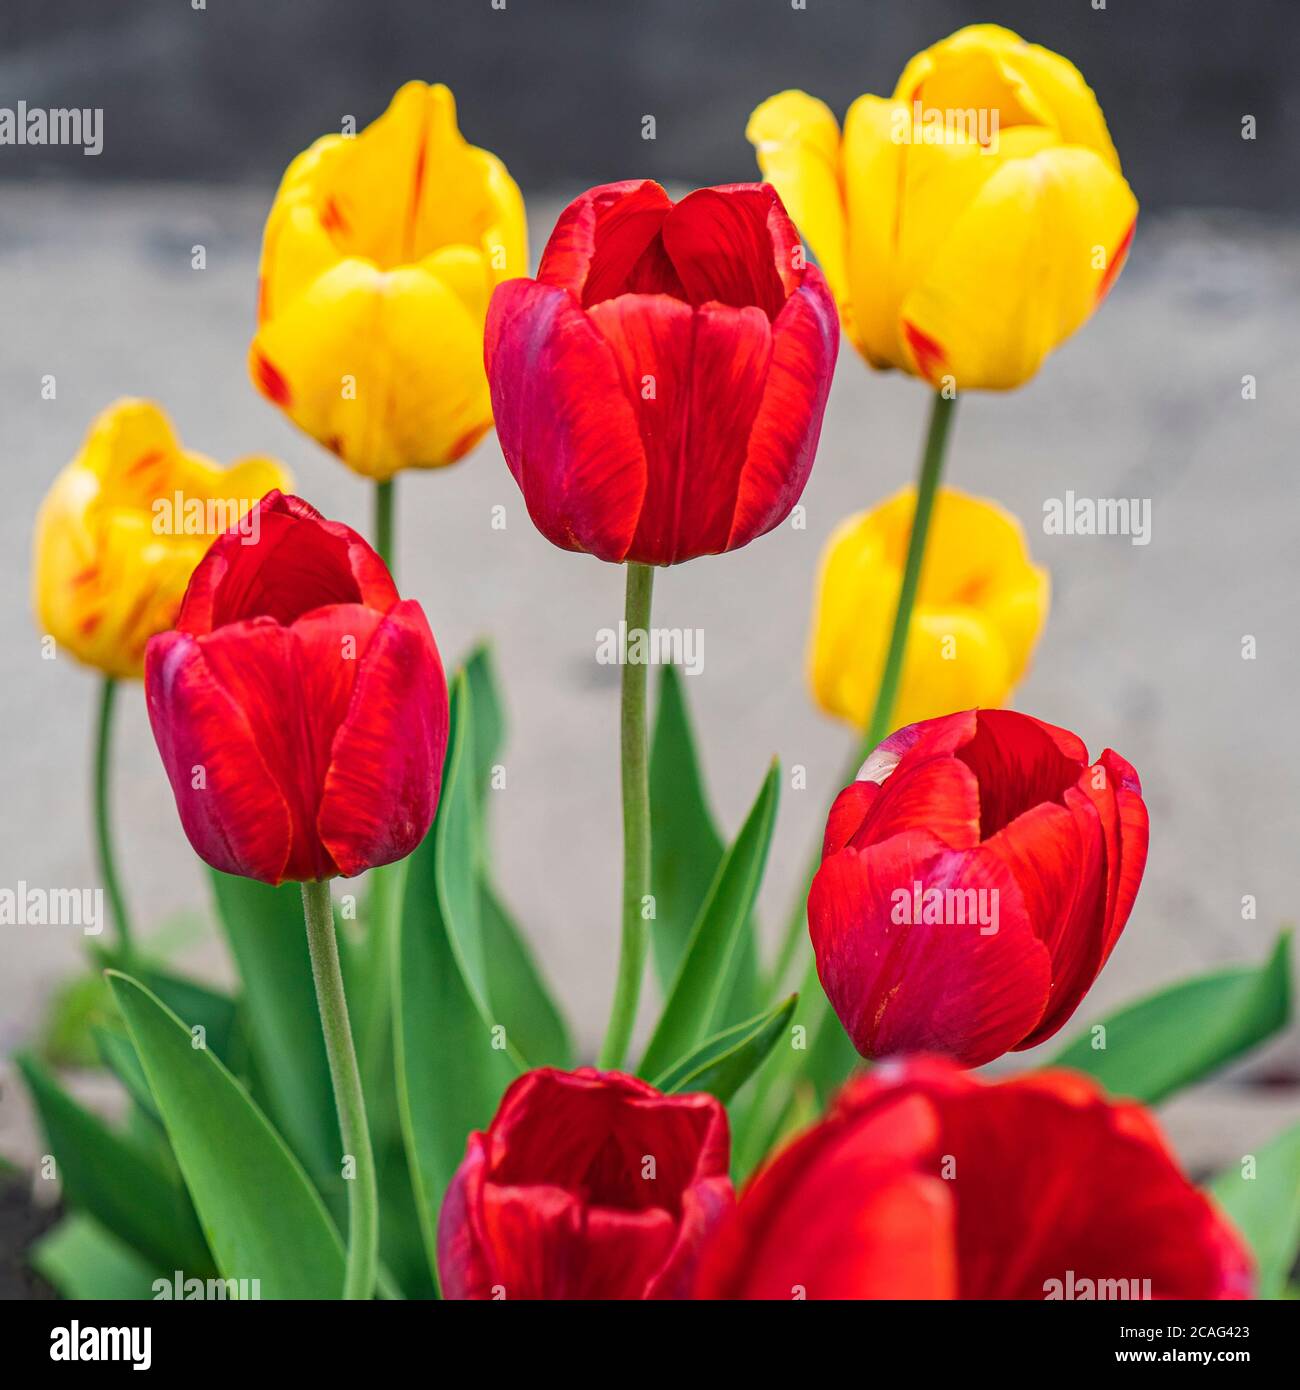 Colorful yellow and red tulips grow with green leaves on the plot. red and yellow tulips Stock Photo